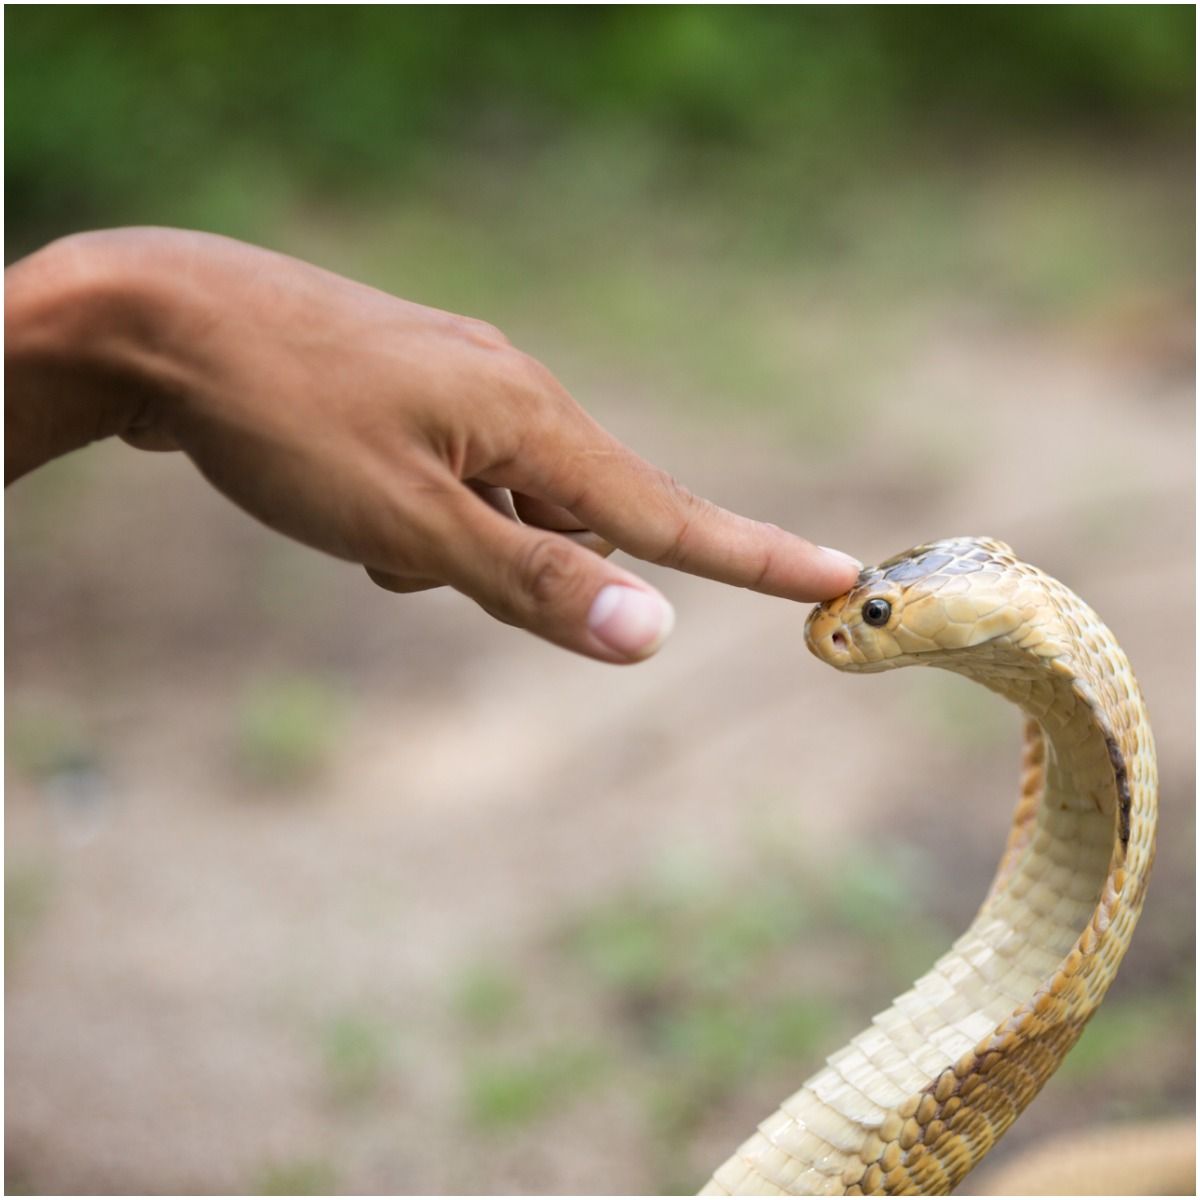 Spiritual Meaning of Snake Bite in a Dream